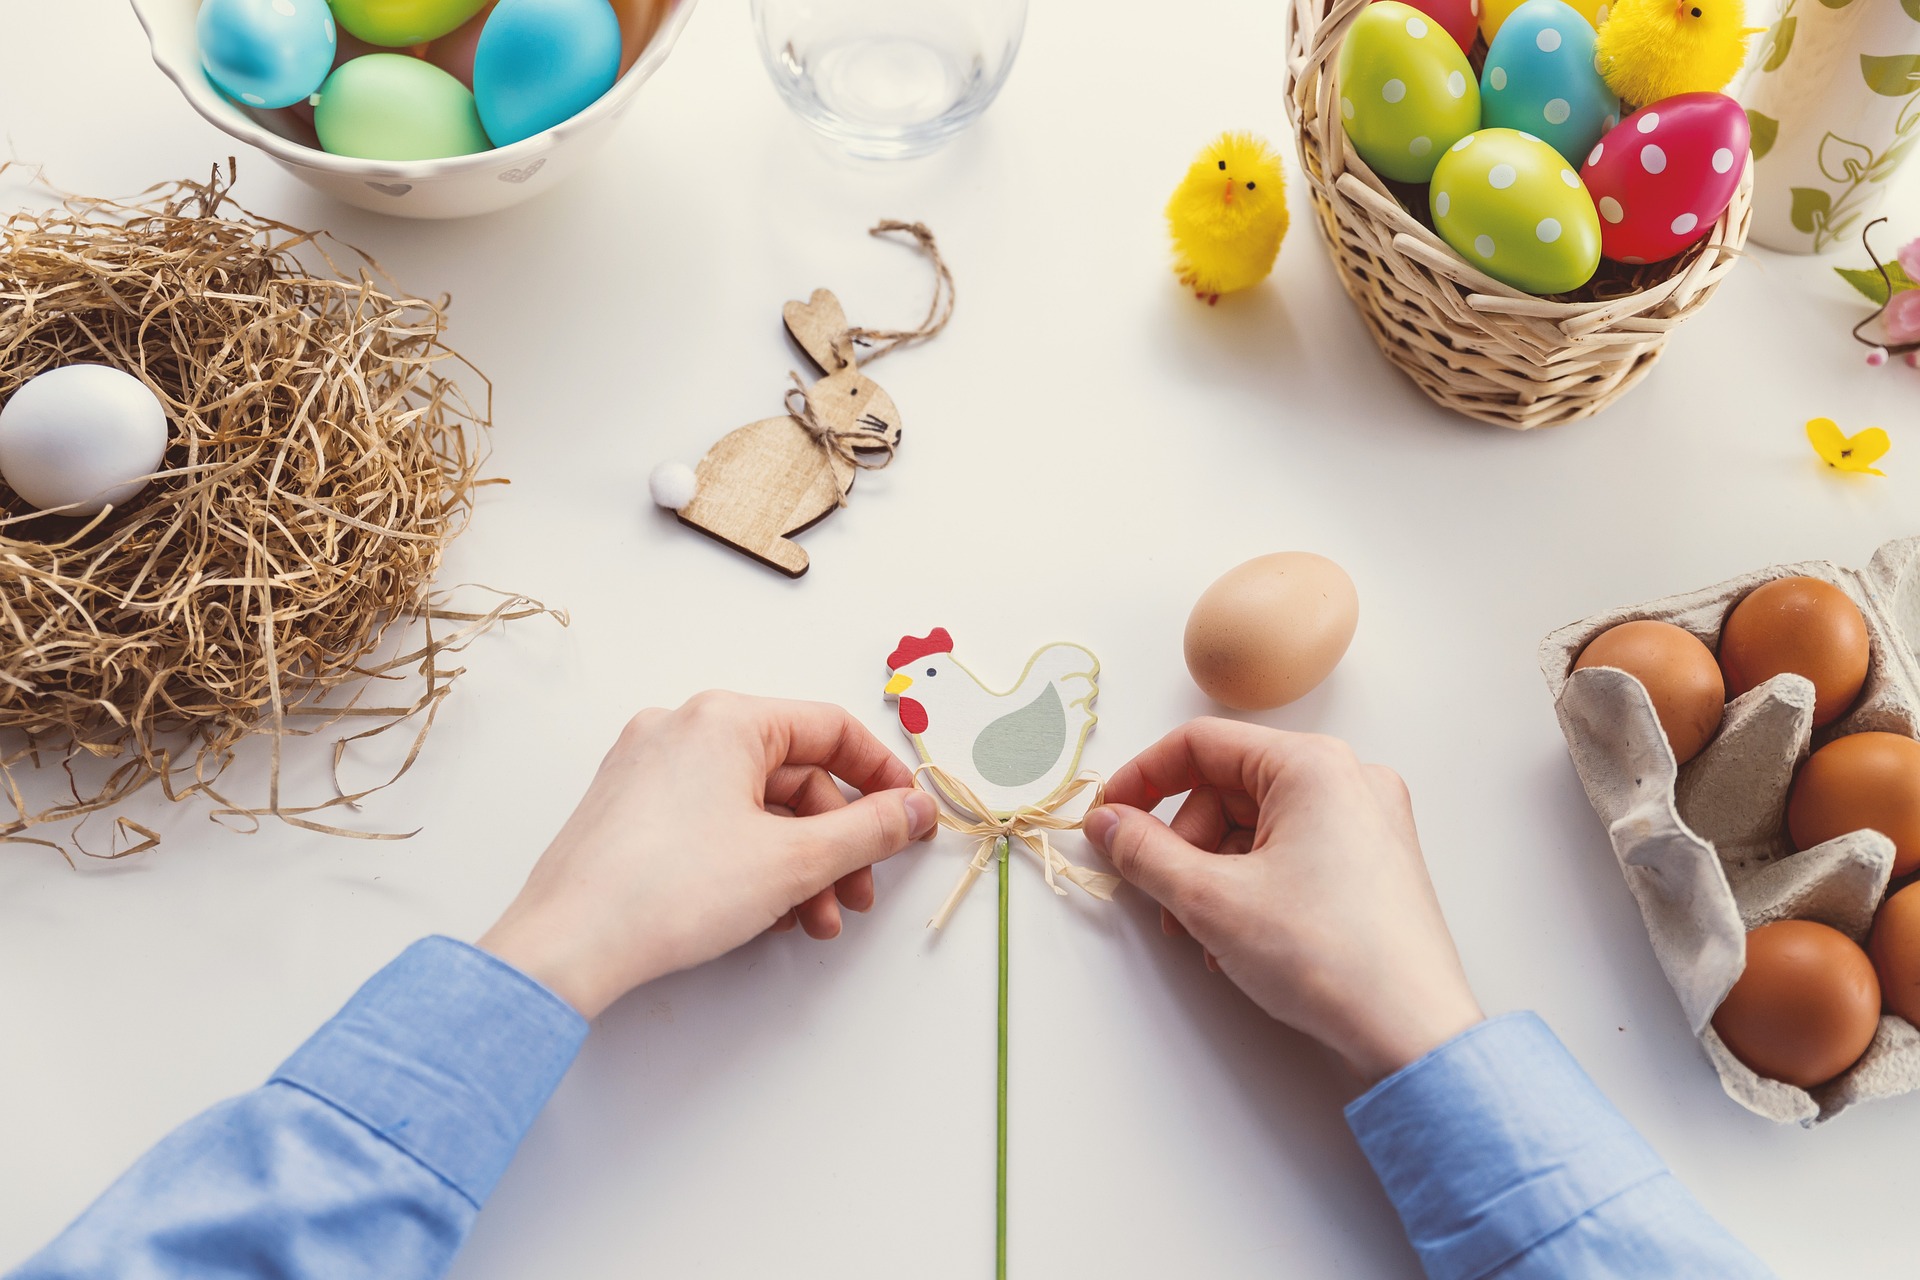 Course Image for 8040C2240 Family Fun:: Easter Crafts (Workshop)